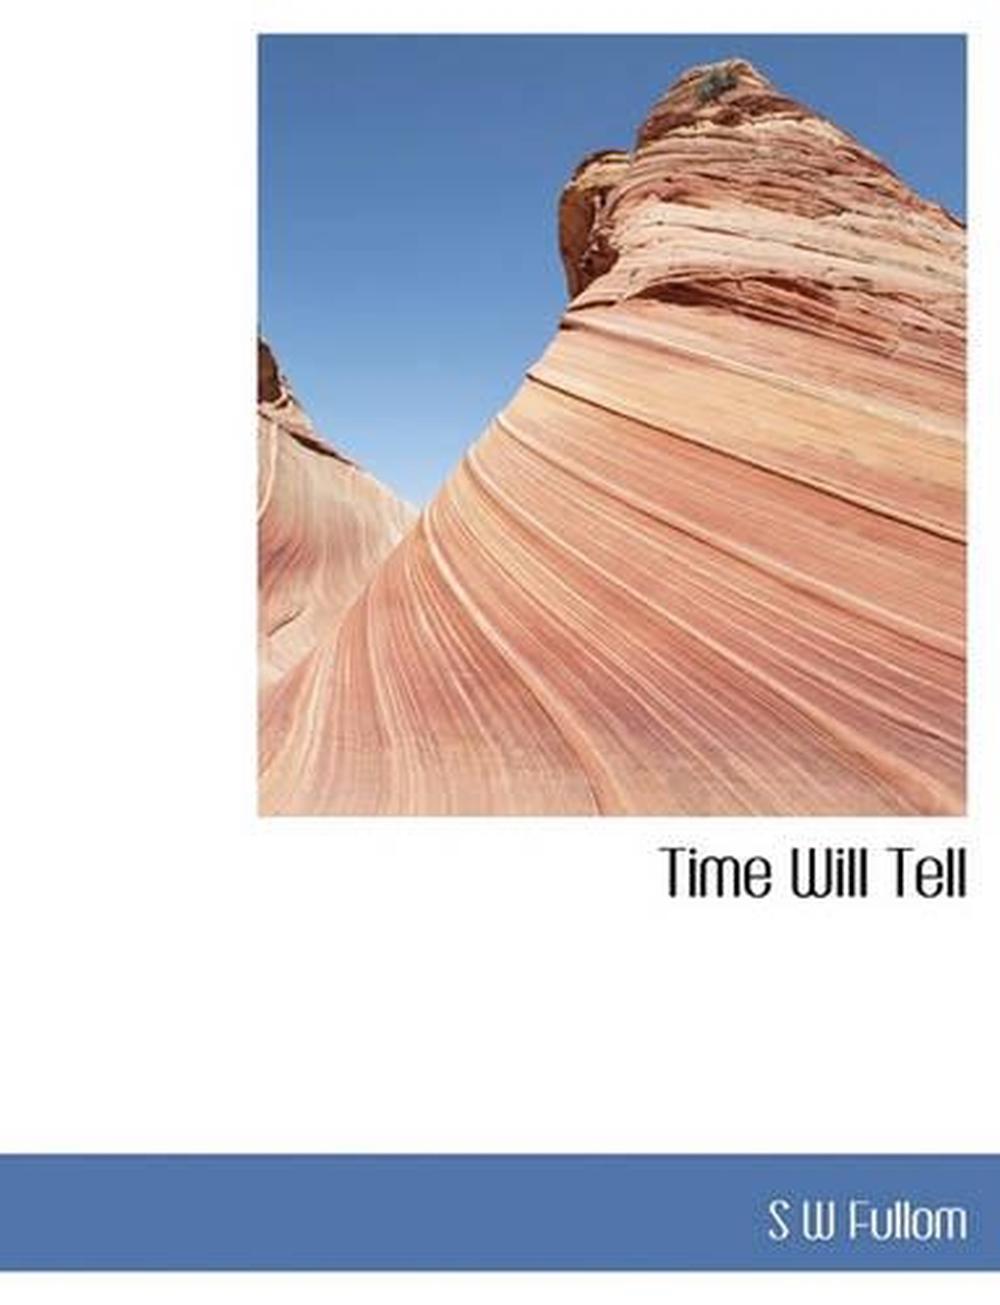 only time will tell book summary